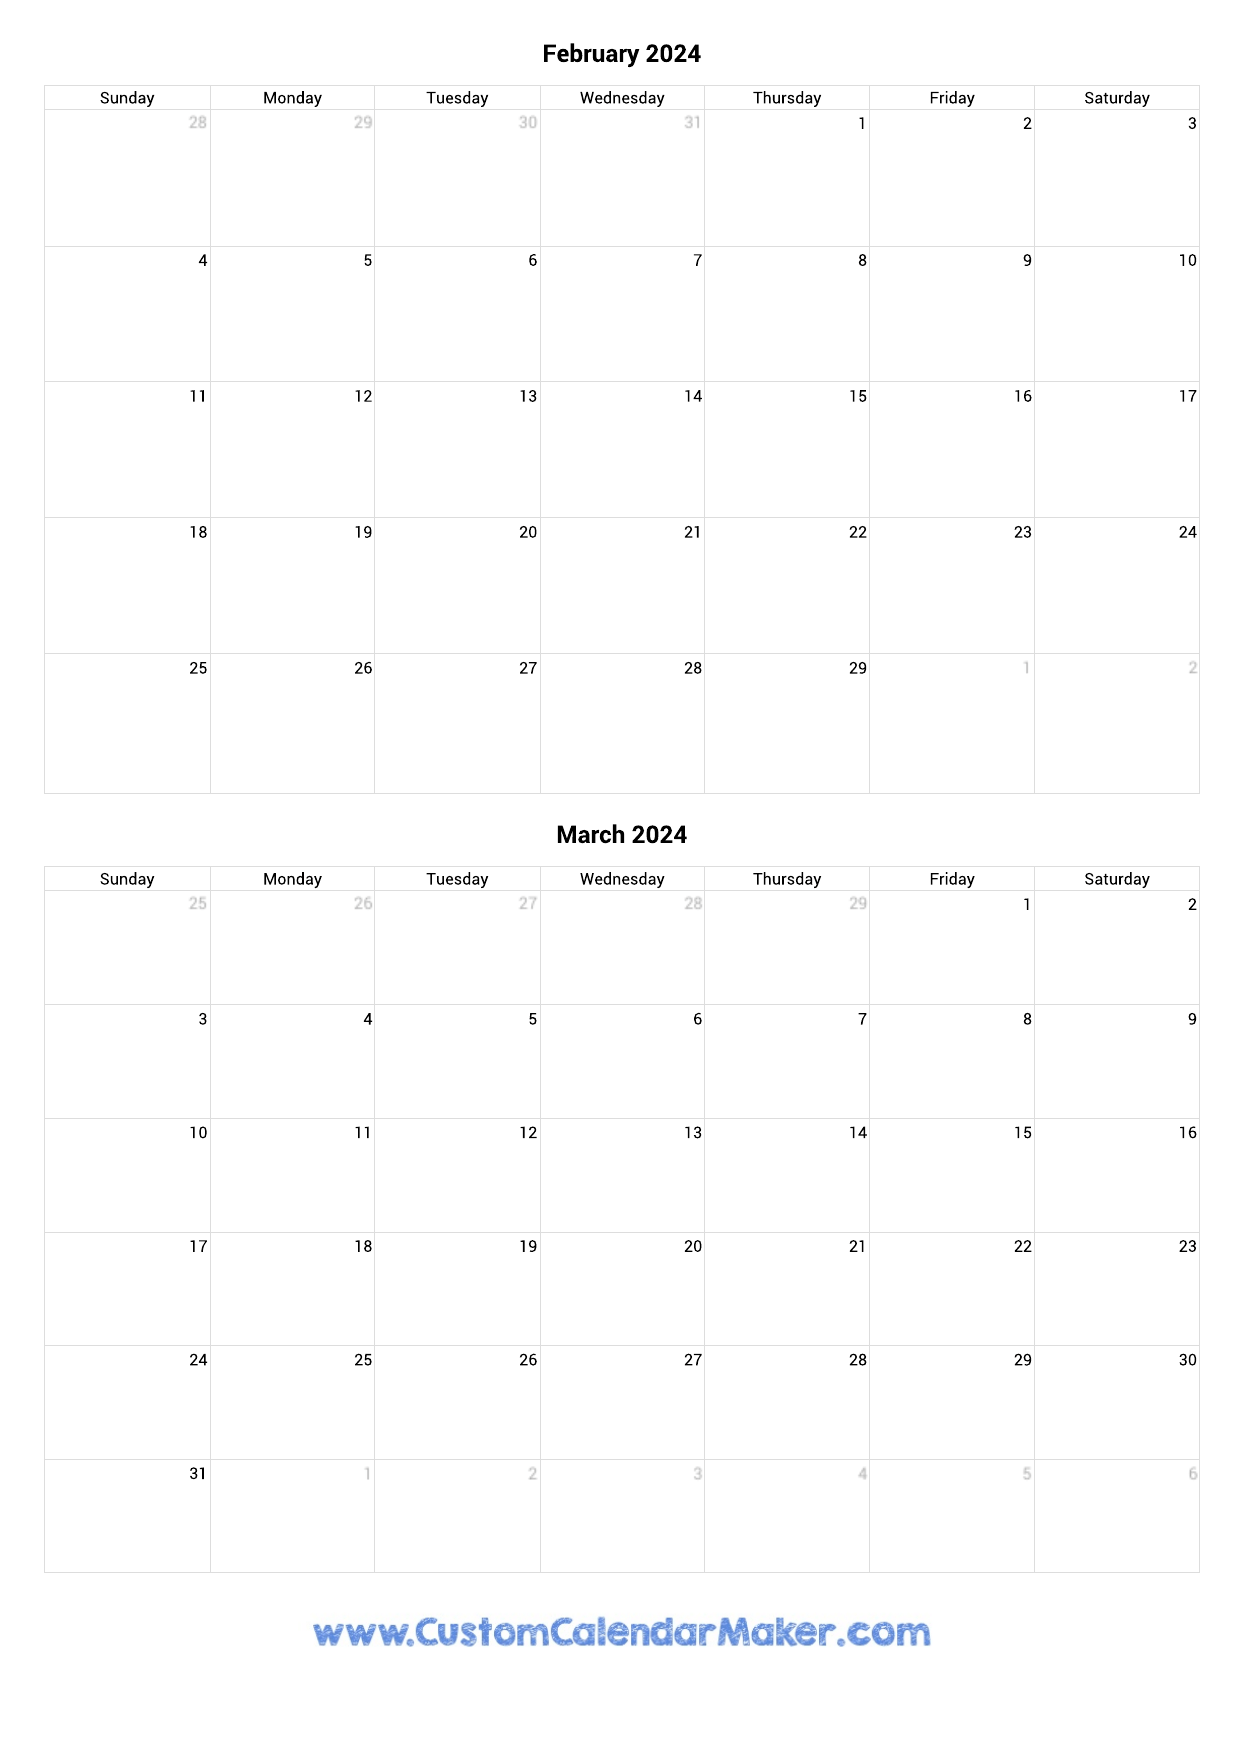 February And March 2024 Calendar for Printable Calendar 2024 February March